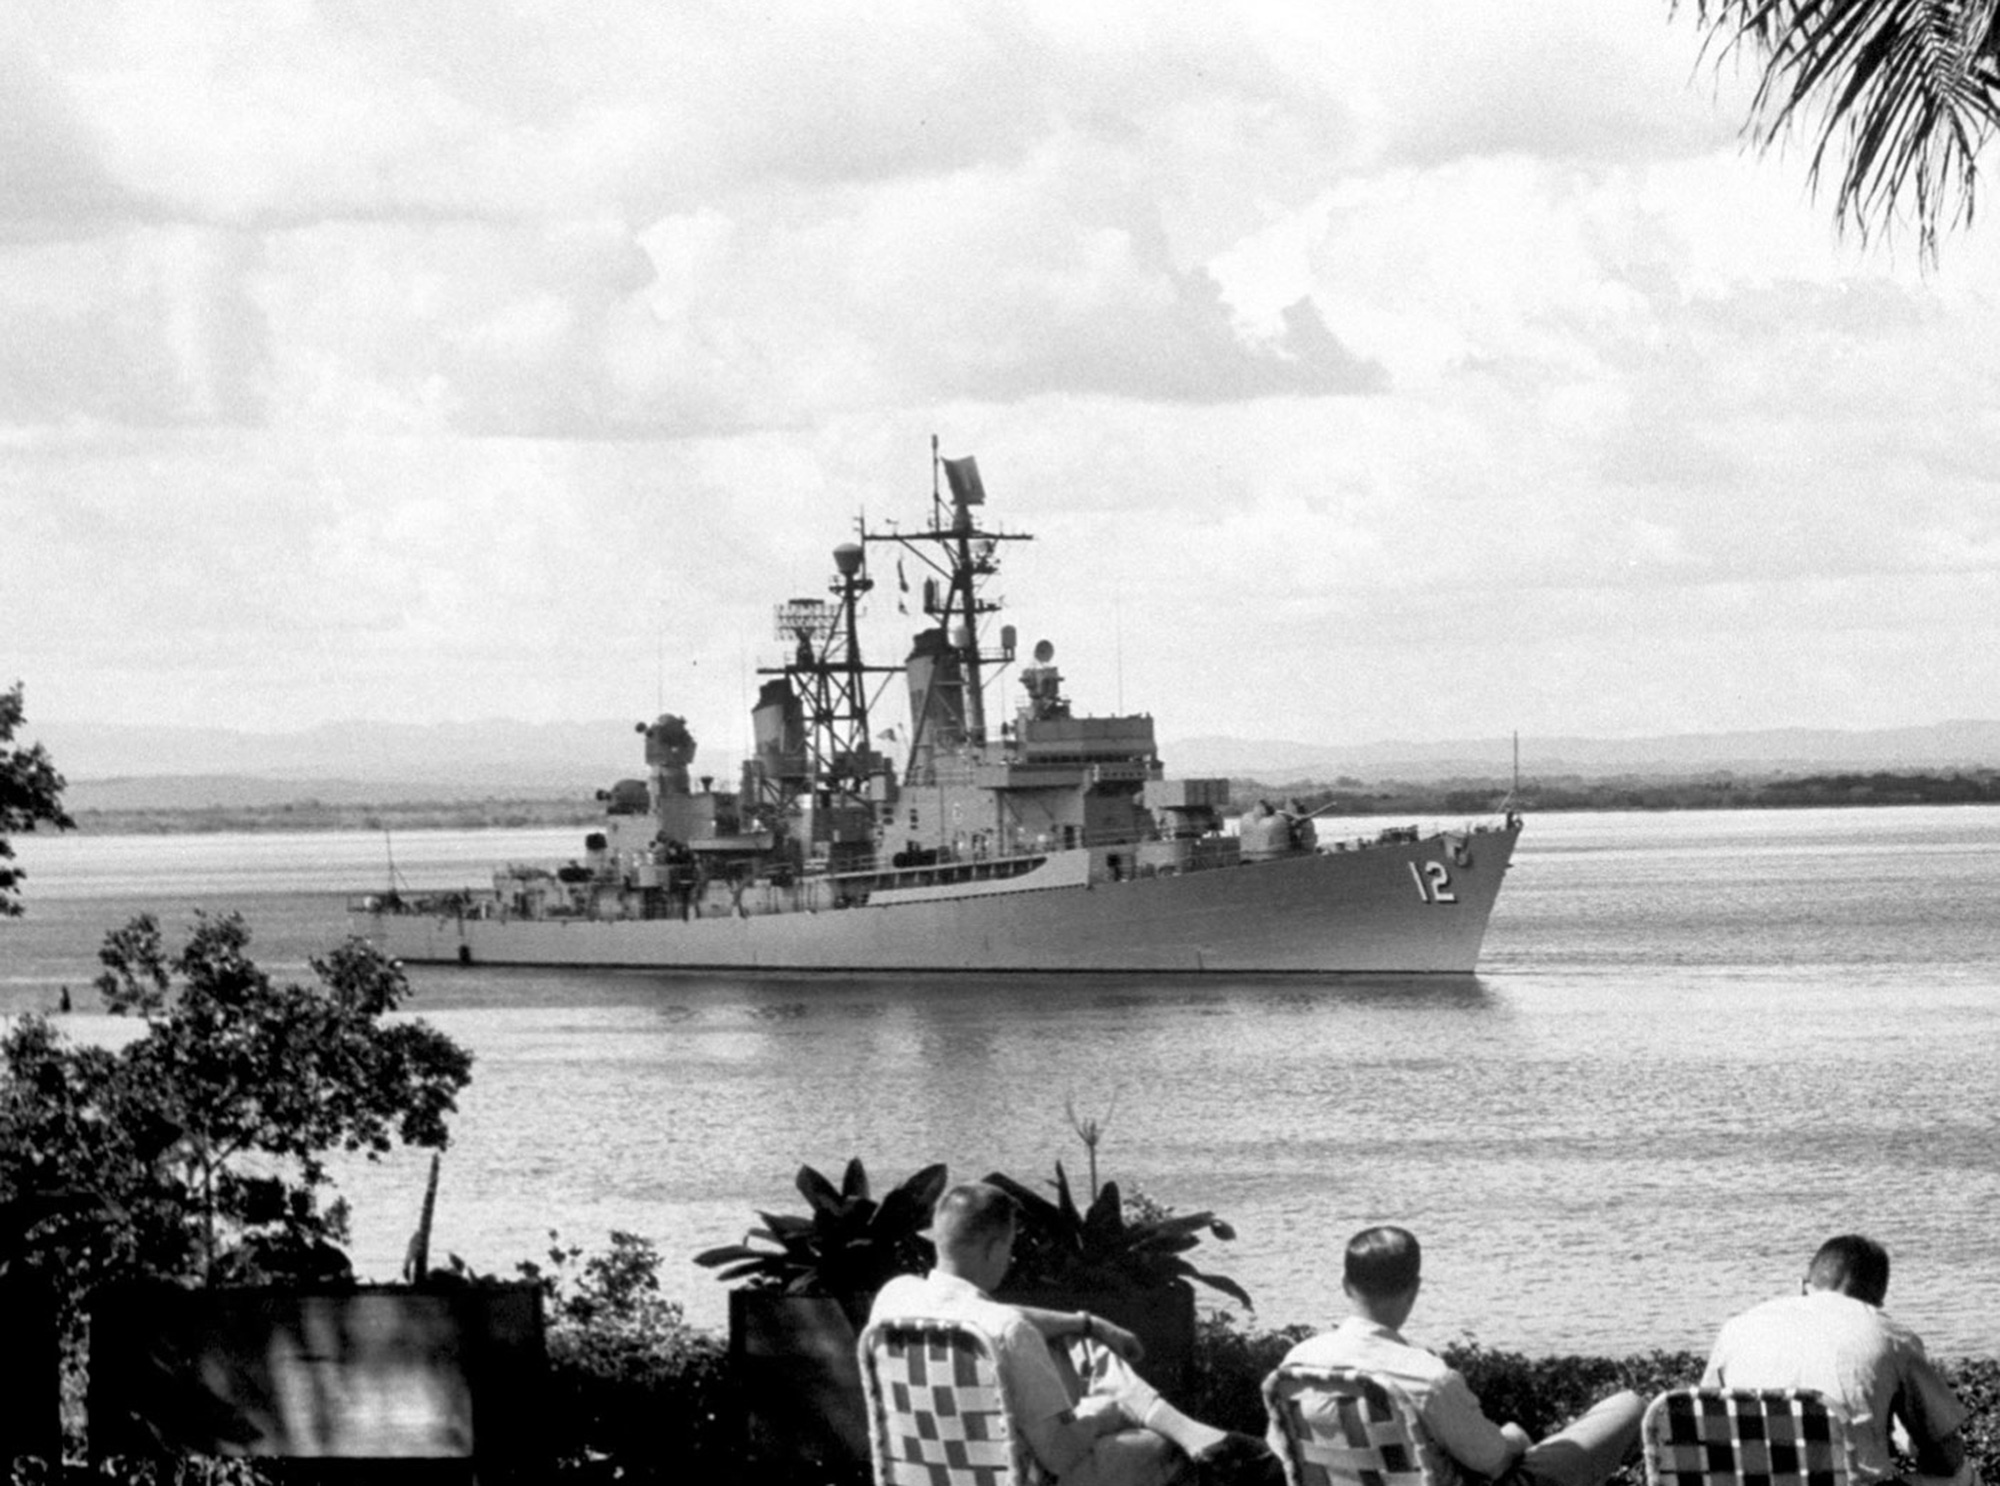 A nineteen sixty-two photograph of men sitting on deck chairs in Guantánamo Bay, looking out at the United States Armed Forces Destroyer “Sullivan,” at the time of the Cuban Missile Crisis.